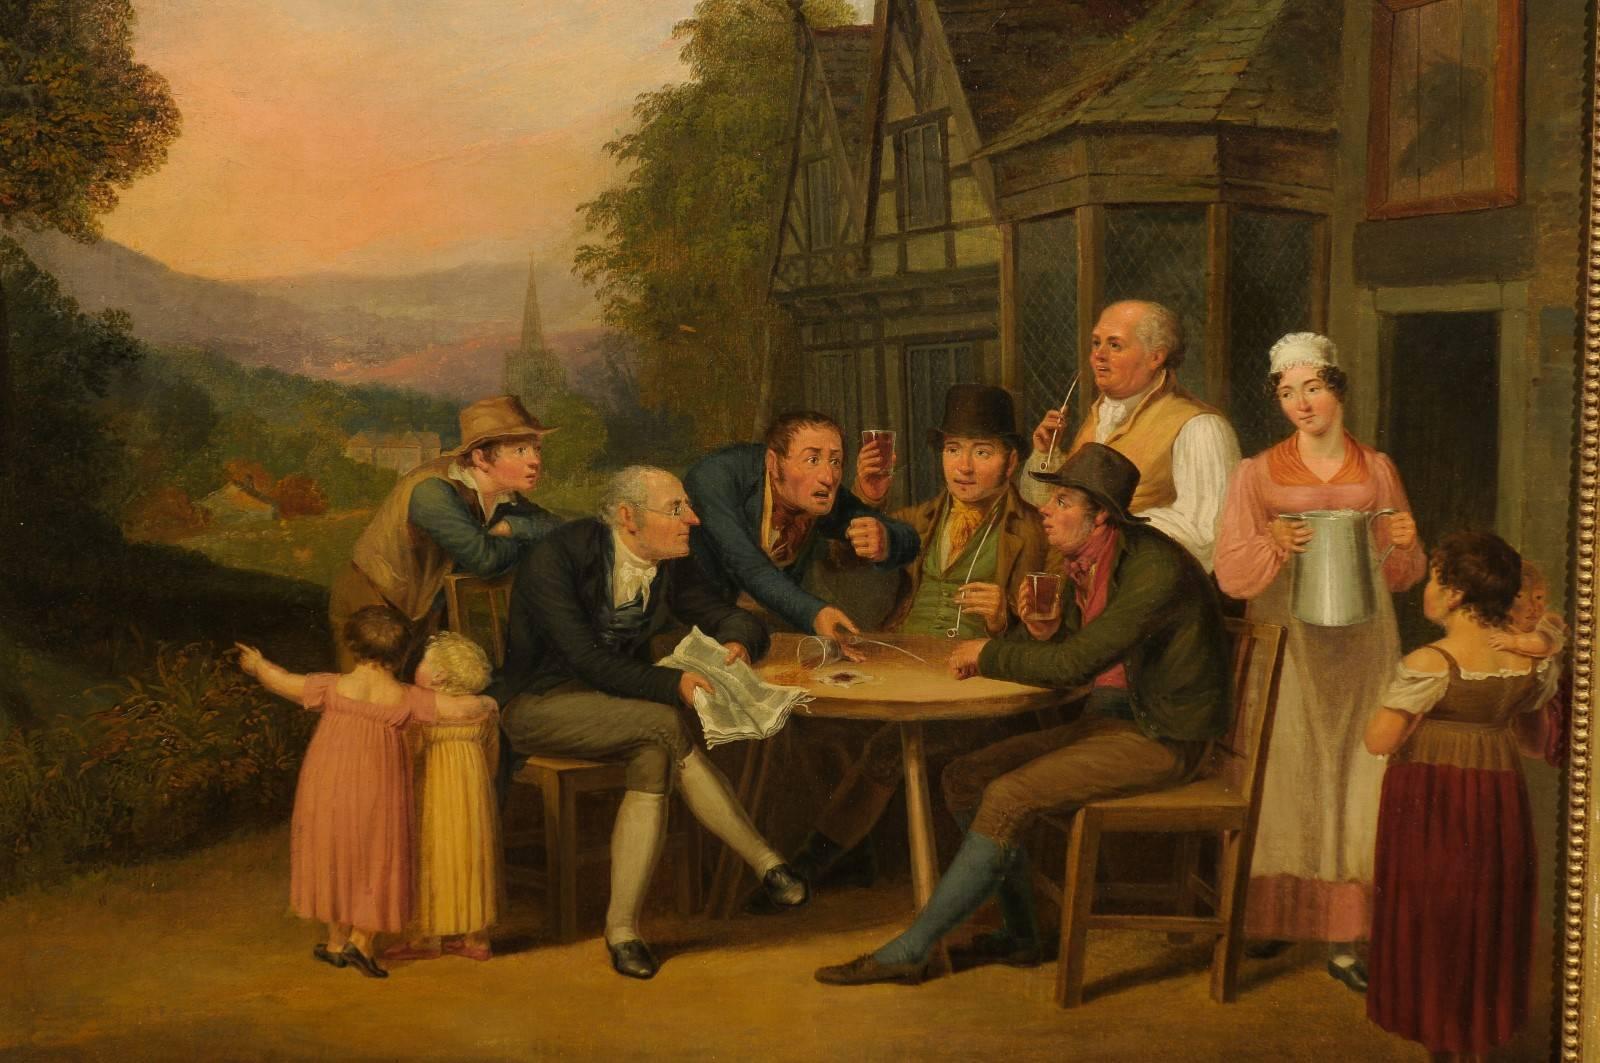 An unsigned oil on canvas of an exterior scene of men sitting around a table. Pretty landscape in the background.